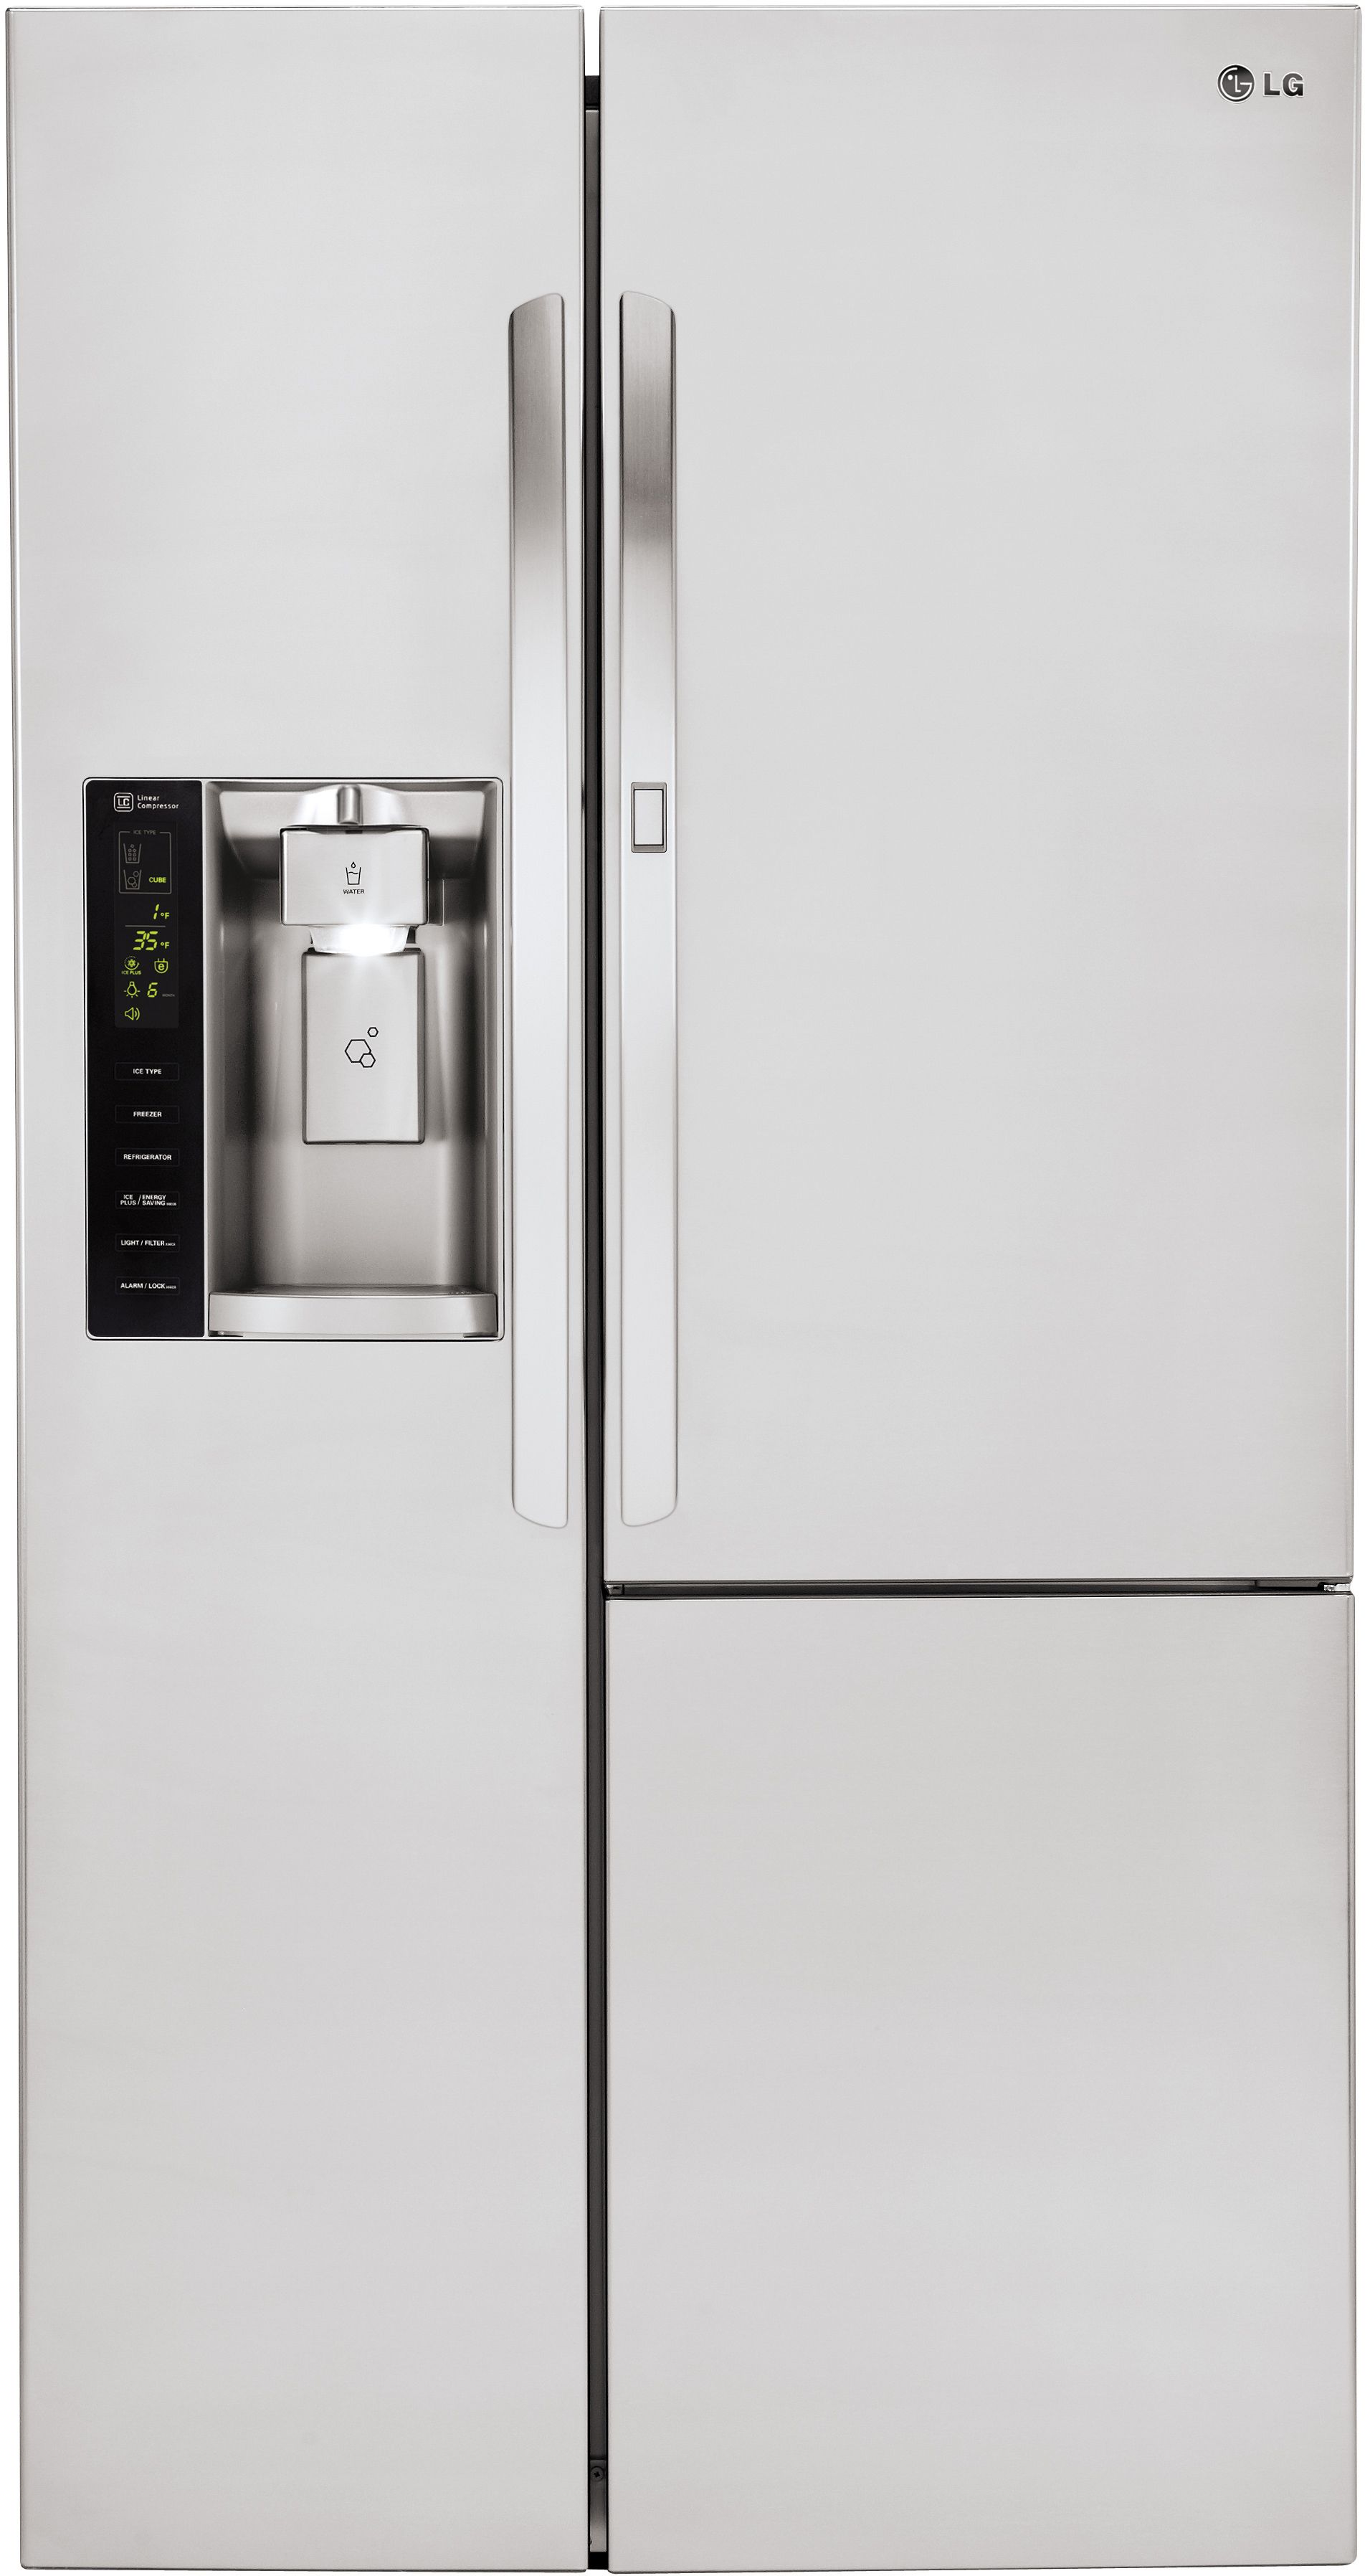 LG 26.1 Cu. Ft. Stainless Steel Side-By-Side Refrigerator-LSXS26366S